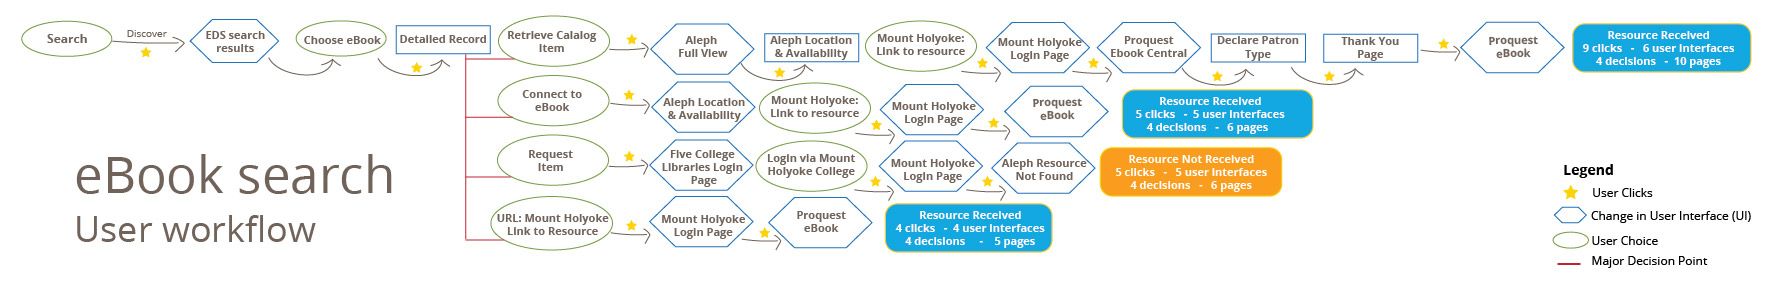 eBook Search - User Workflow